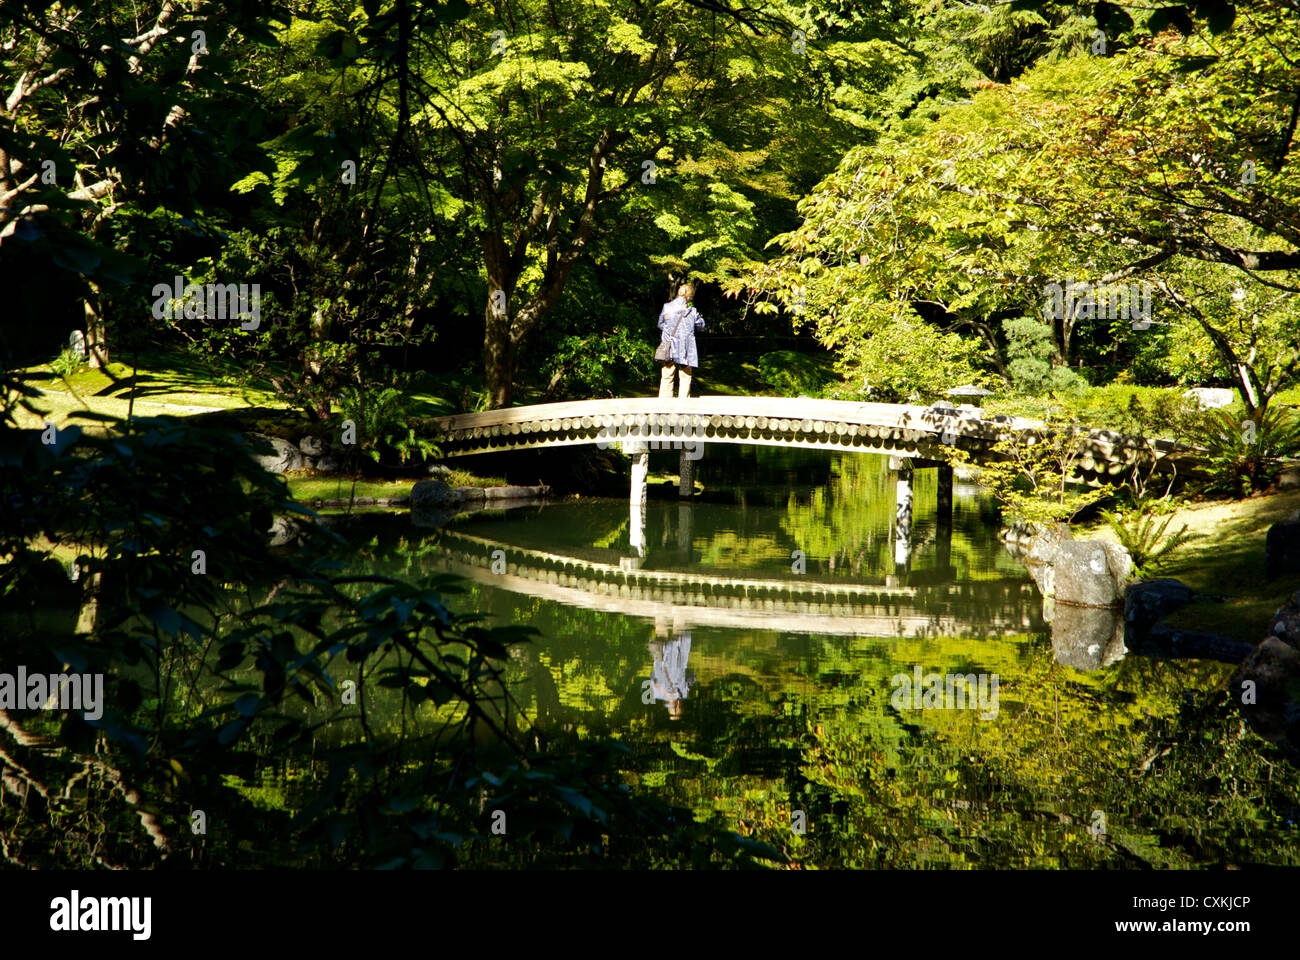 Early autumn foliage on trees wooden bridge reflection in pond at Nitobe Japanese Gardens UBC Vancouver Stock Photo